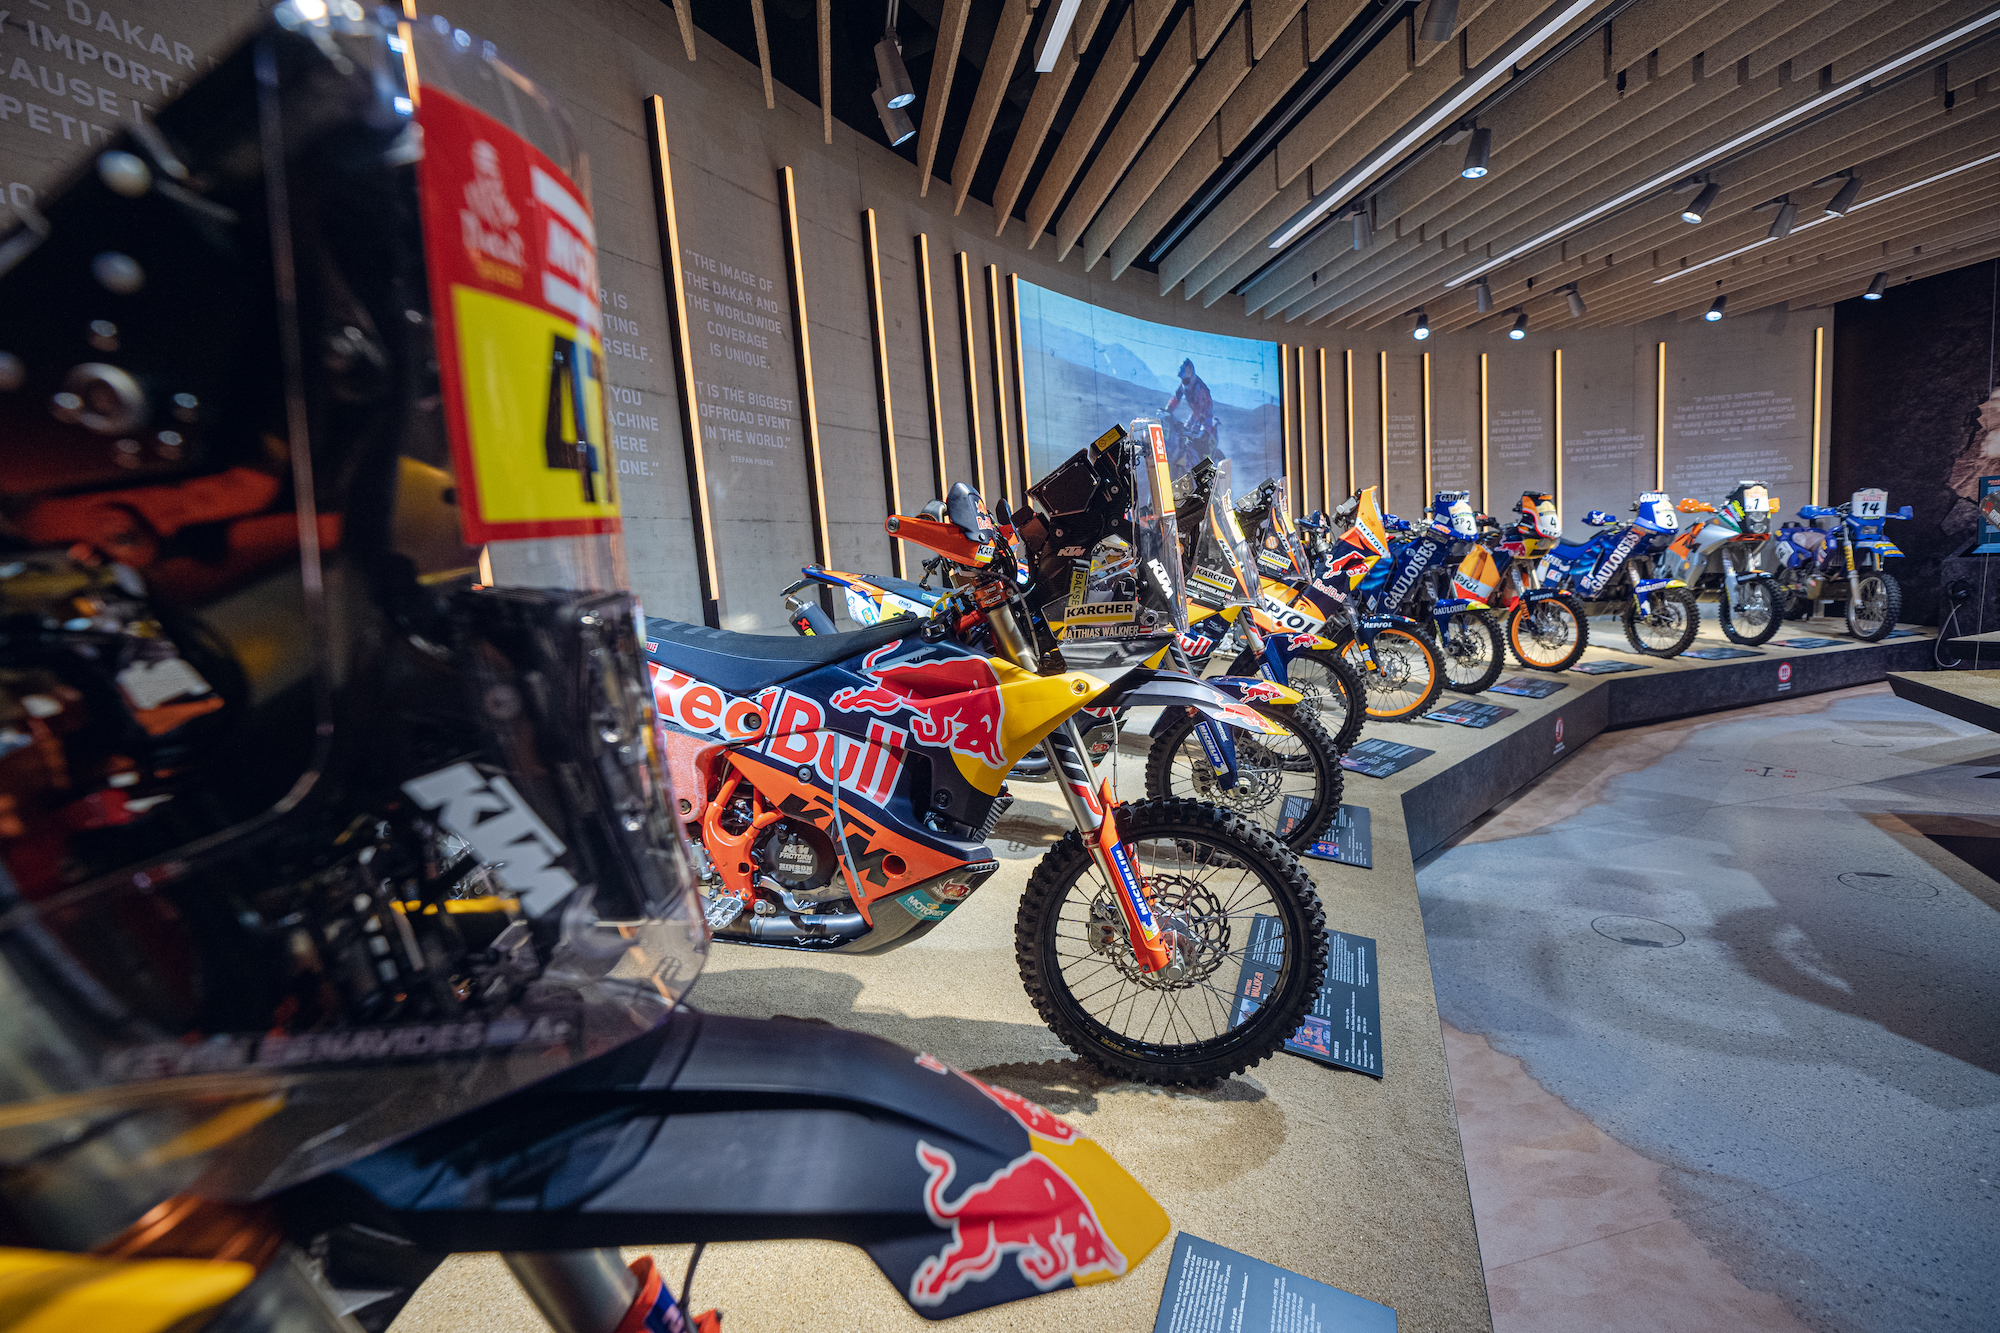 A view of the "Legends of the Dakar" Exhibition, hosted by KTM Motohall. Media sourced from KTM.